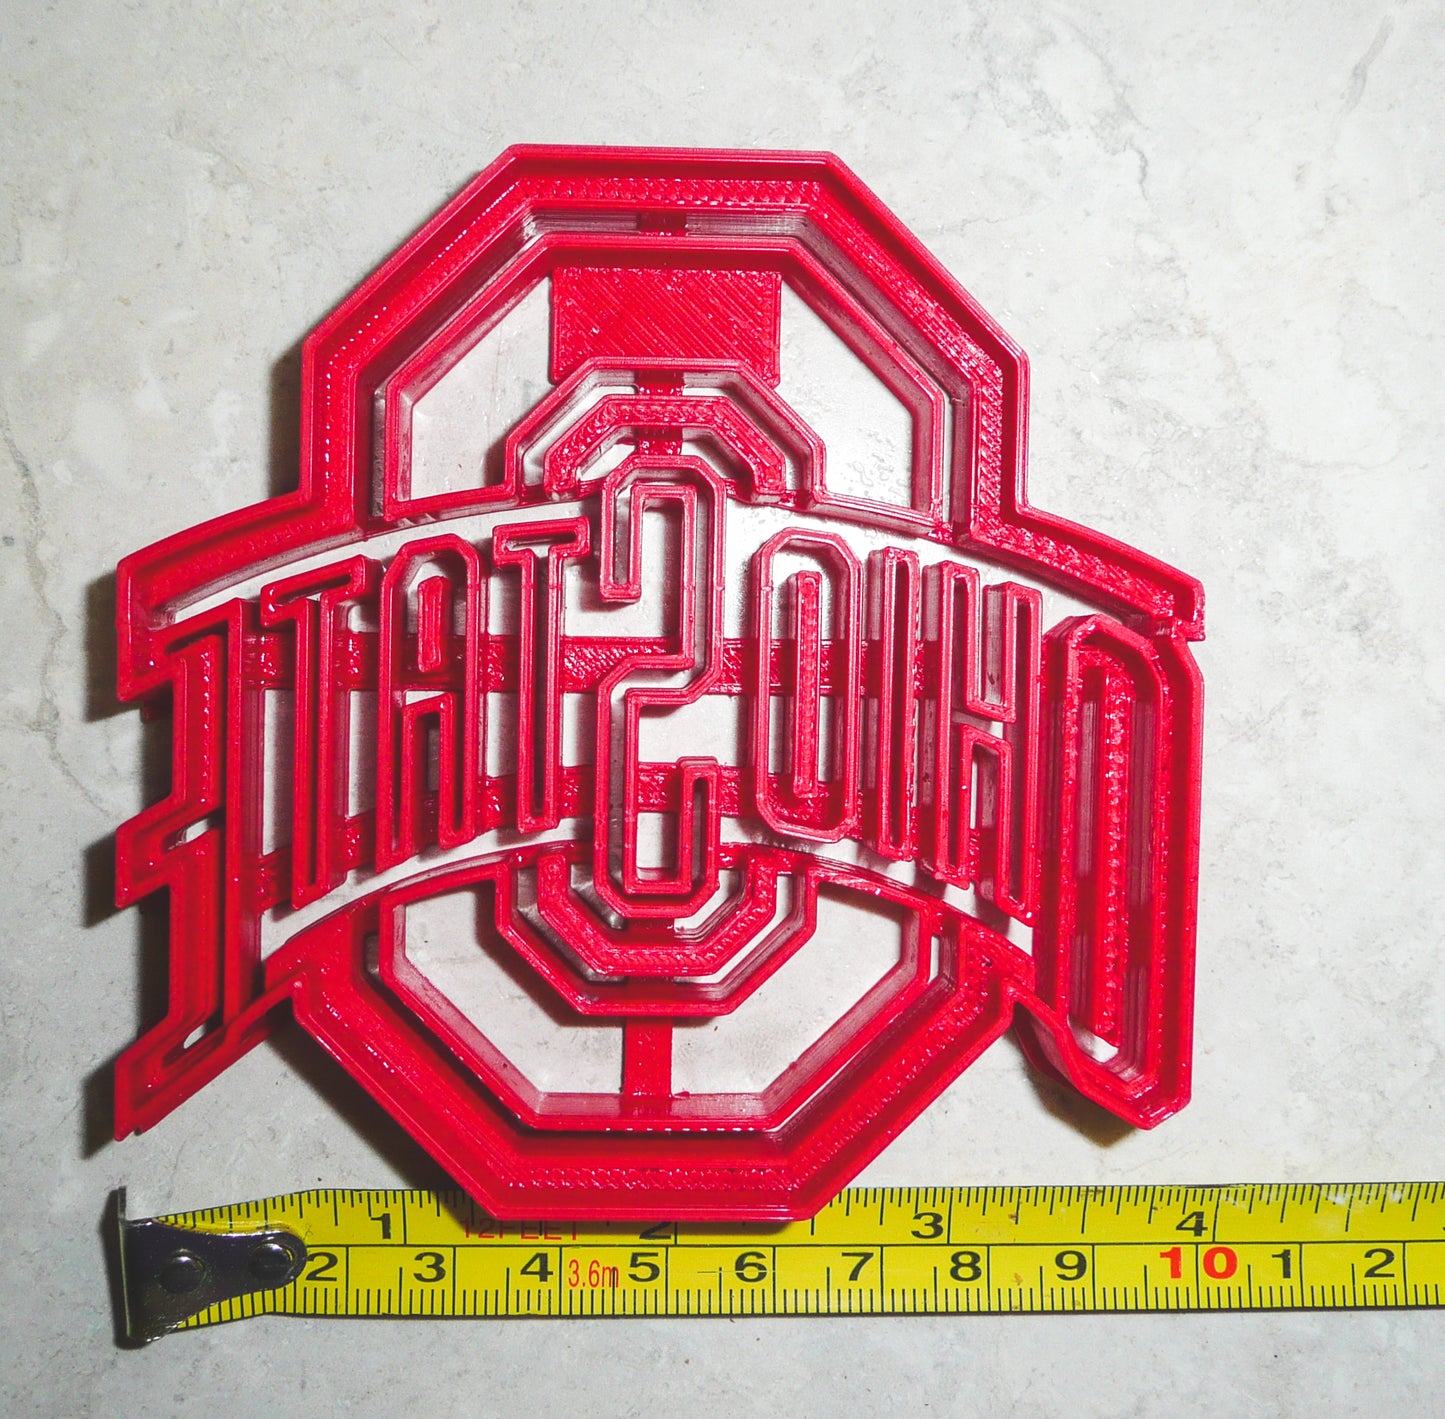 Ohio State Buckeyes Football Logo Cookie Cutter 3D Printed Made In USA PR925